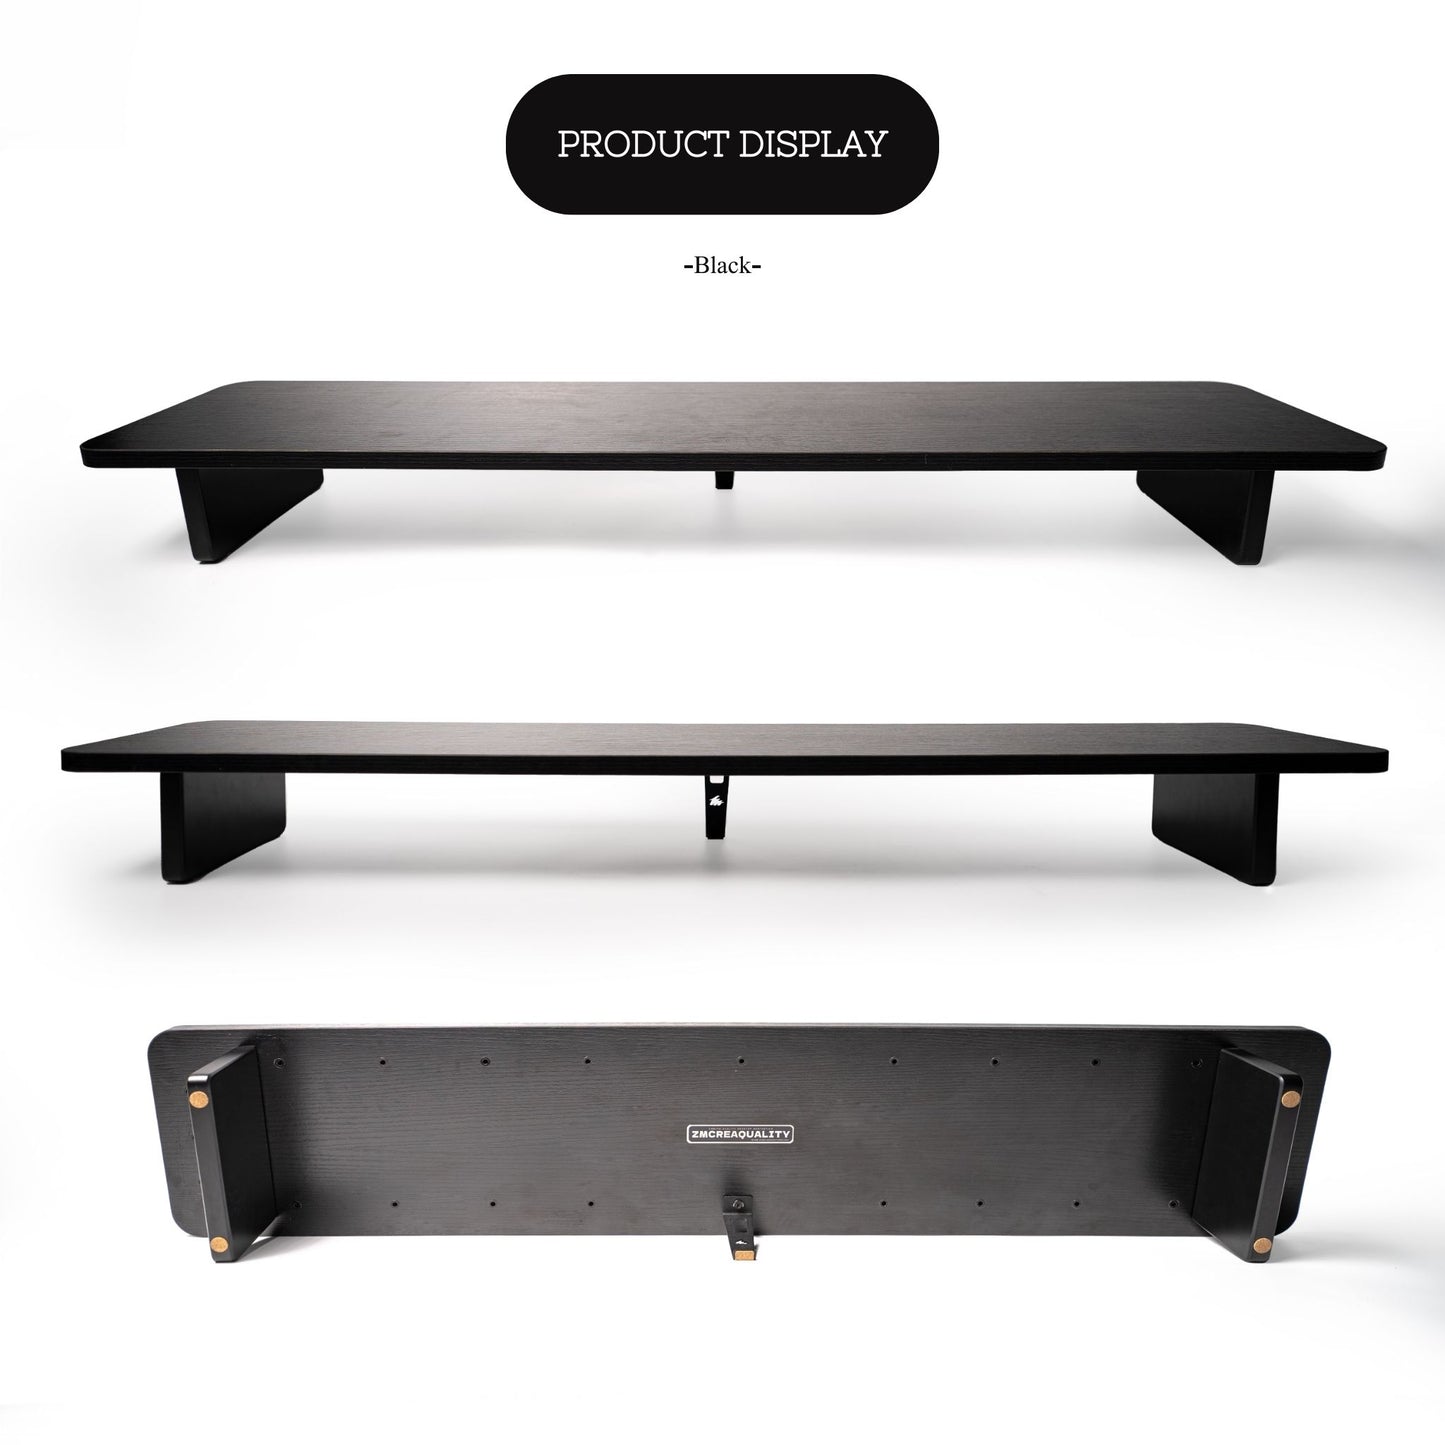 ZM M30 Ecological wood monitor stand riser burlywood preview